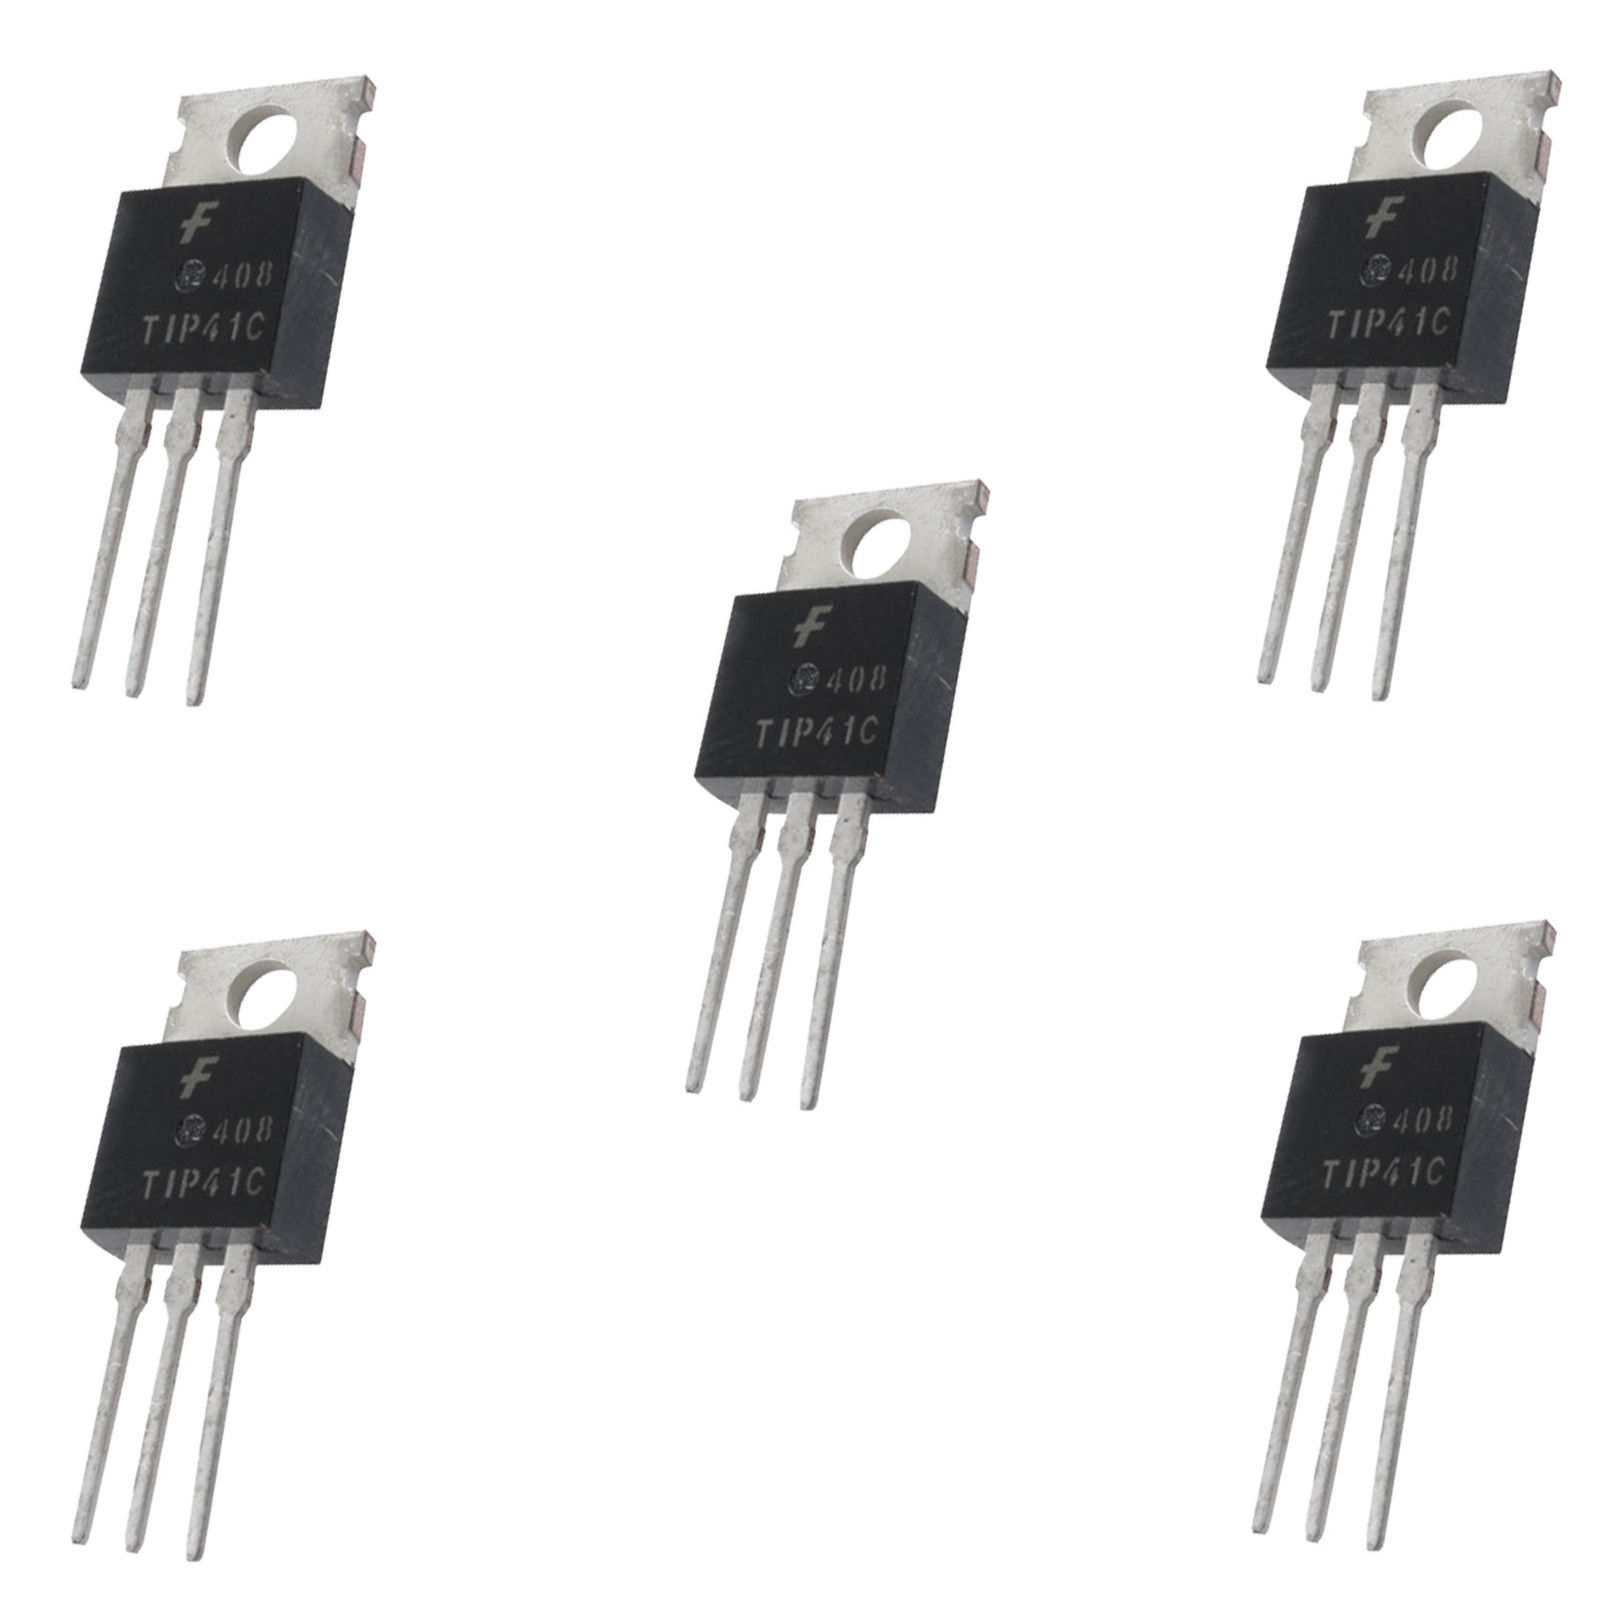 Tip41-1st Class Post 5 X Tip41c Npn Power Transistor to-220 